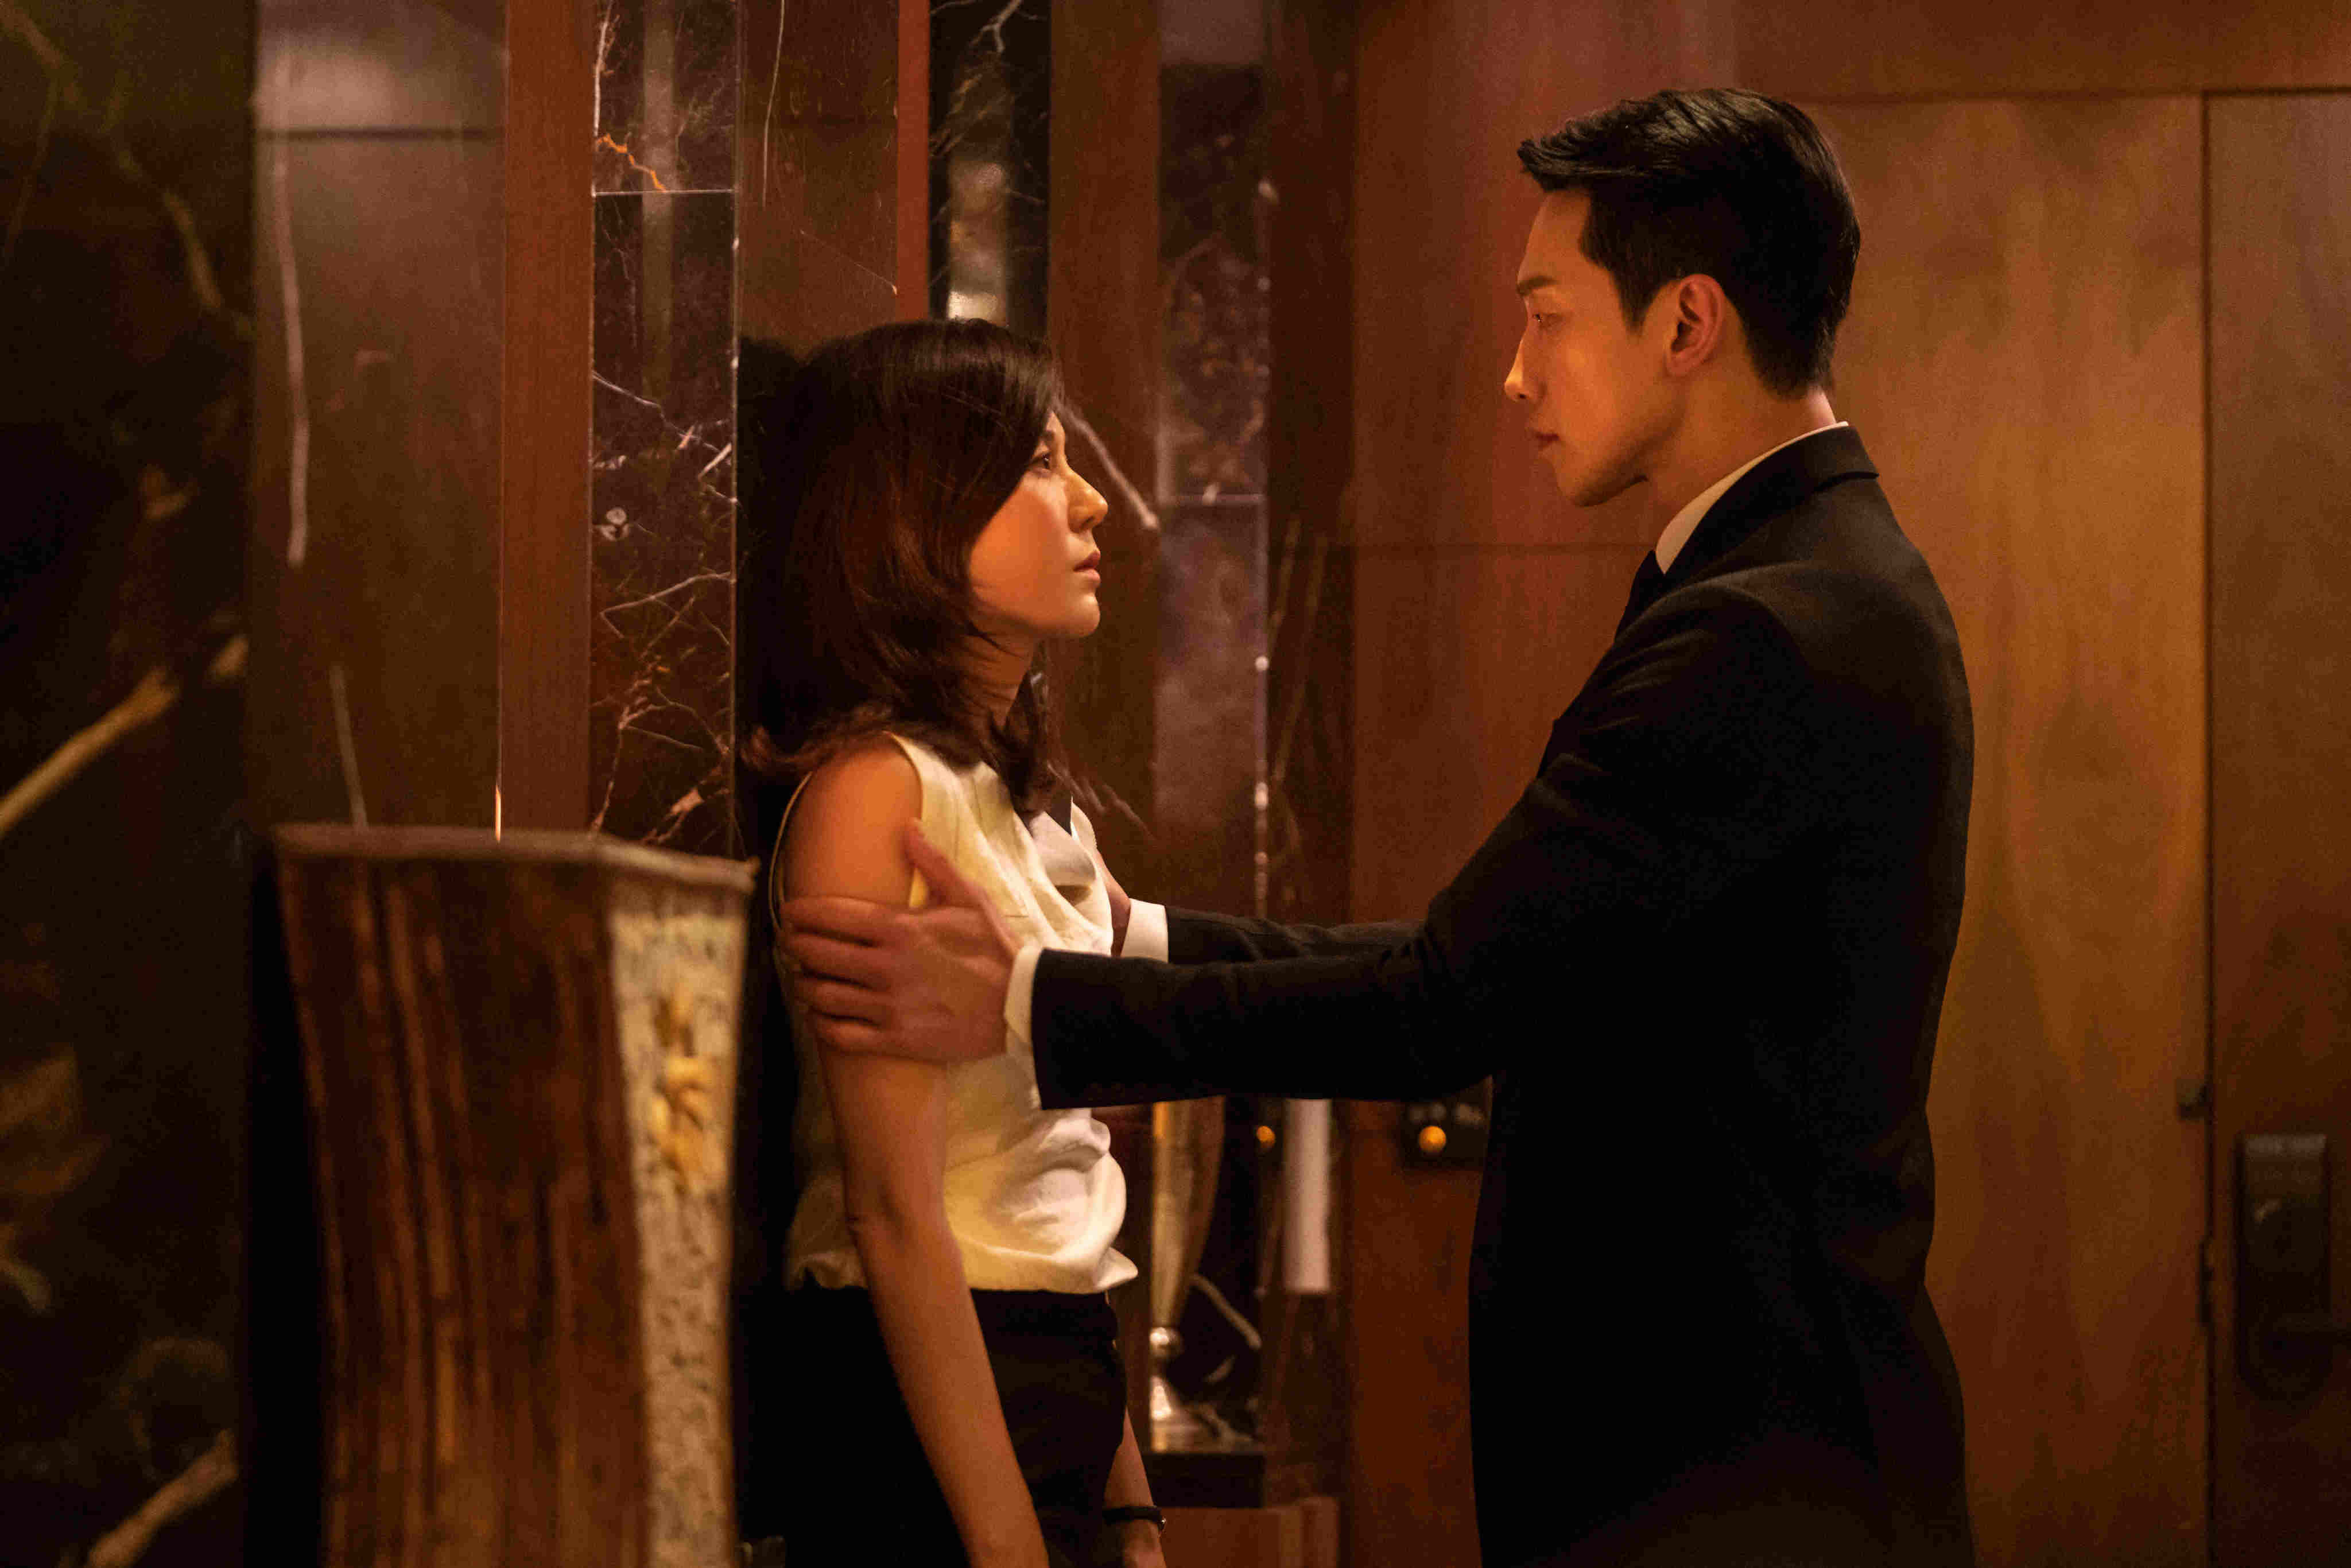 Kim Ha-neul (left) and Rain in a still from Red Swan. Photo: Disney+